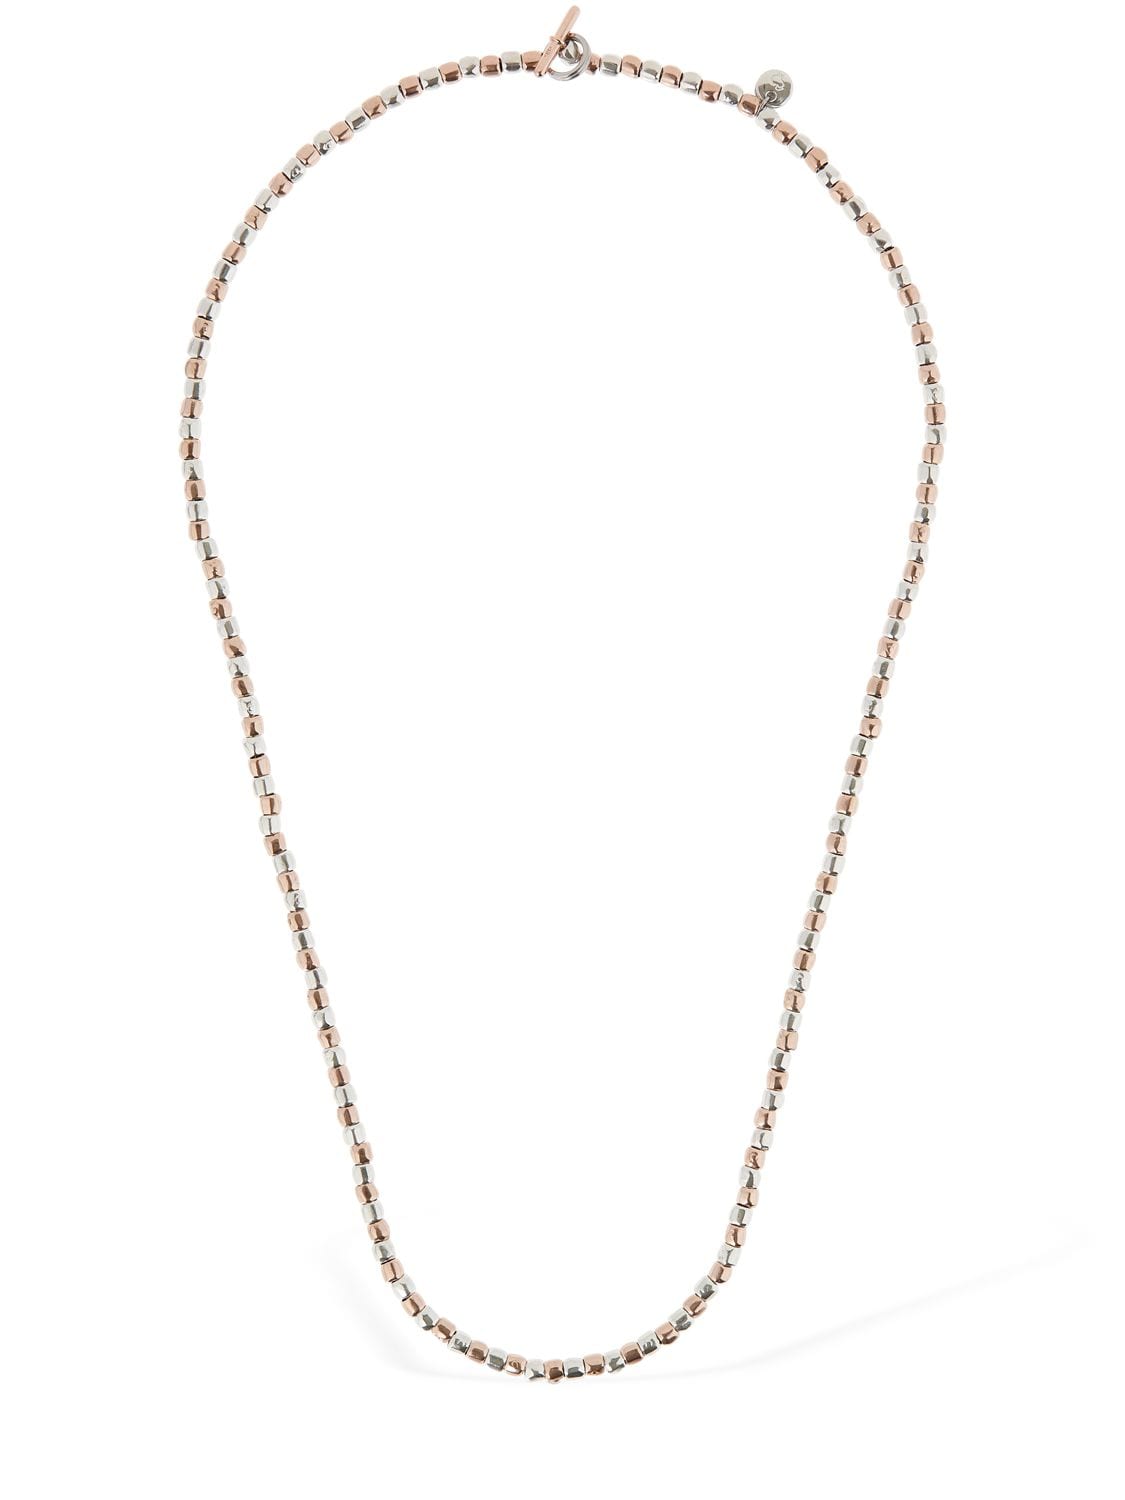 DODO 9KT GRANELLI TWO TONE CHAIN NECKLACE,73IY6C013-RZLBTVG1